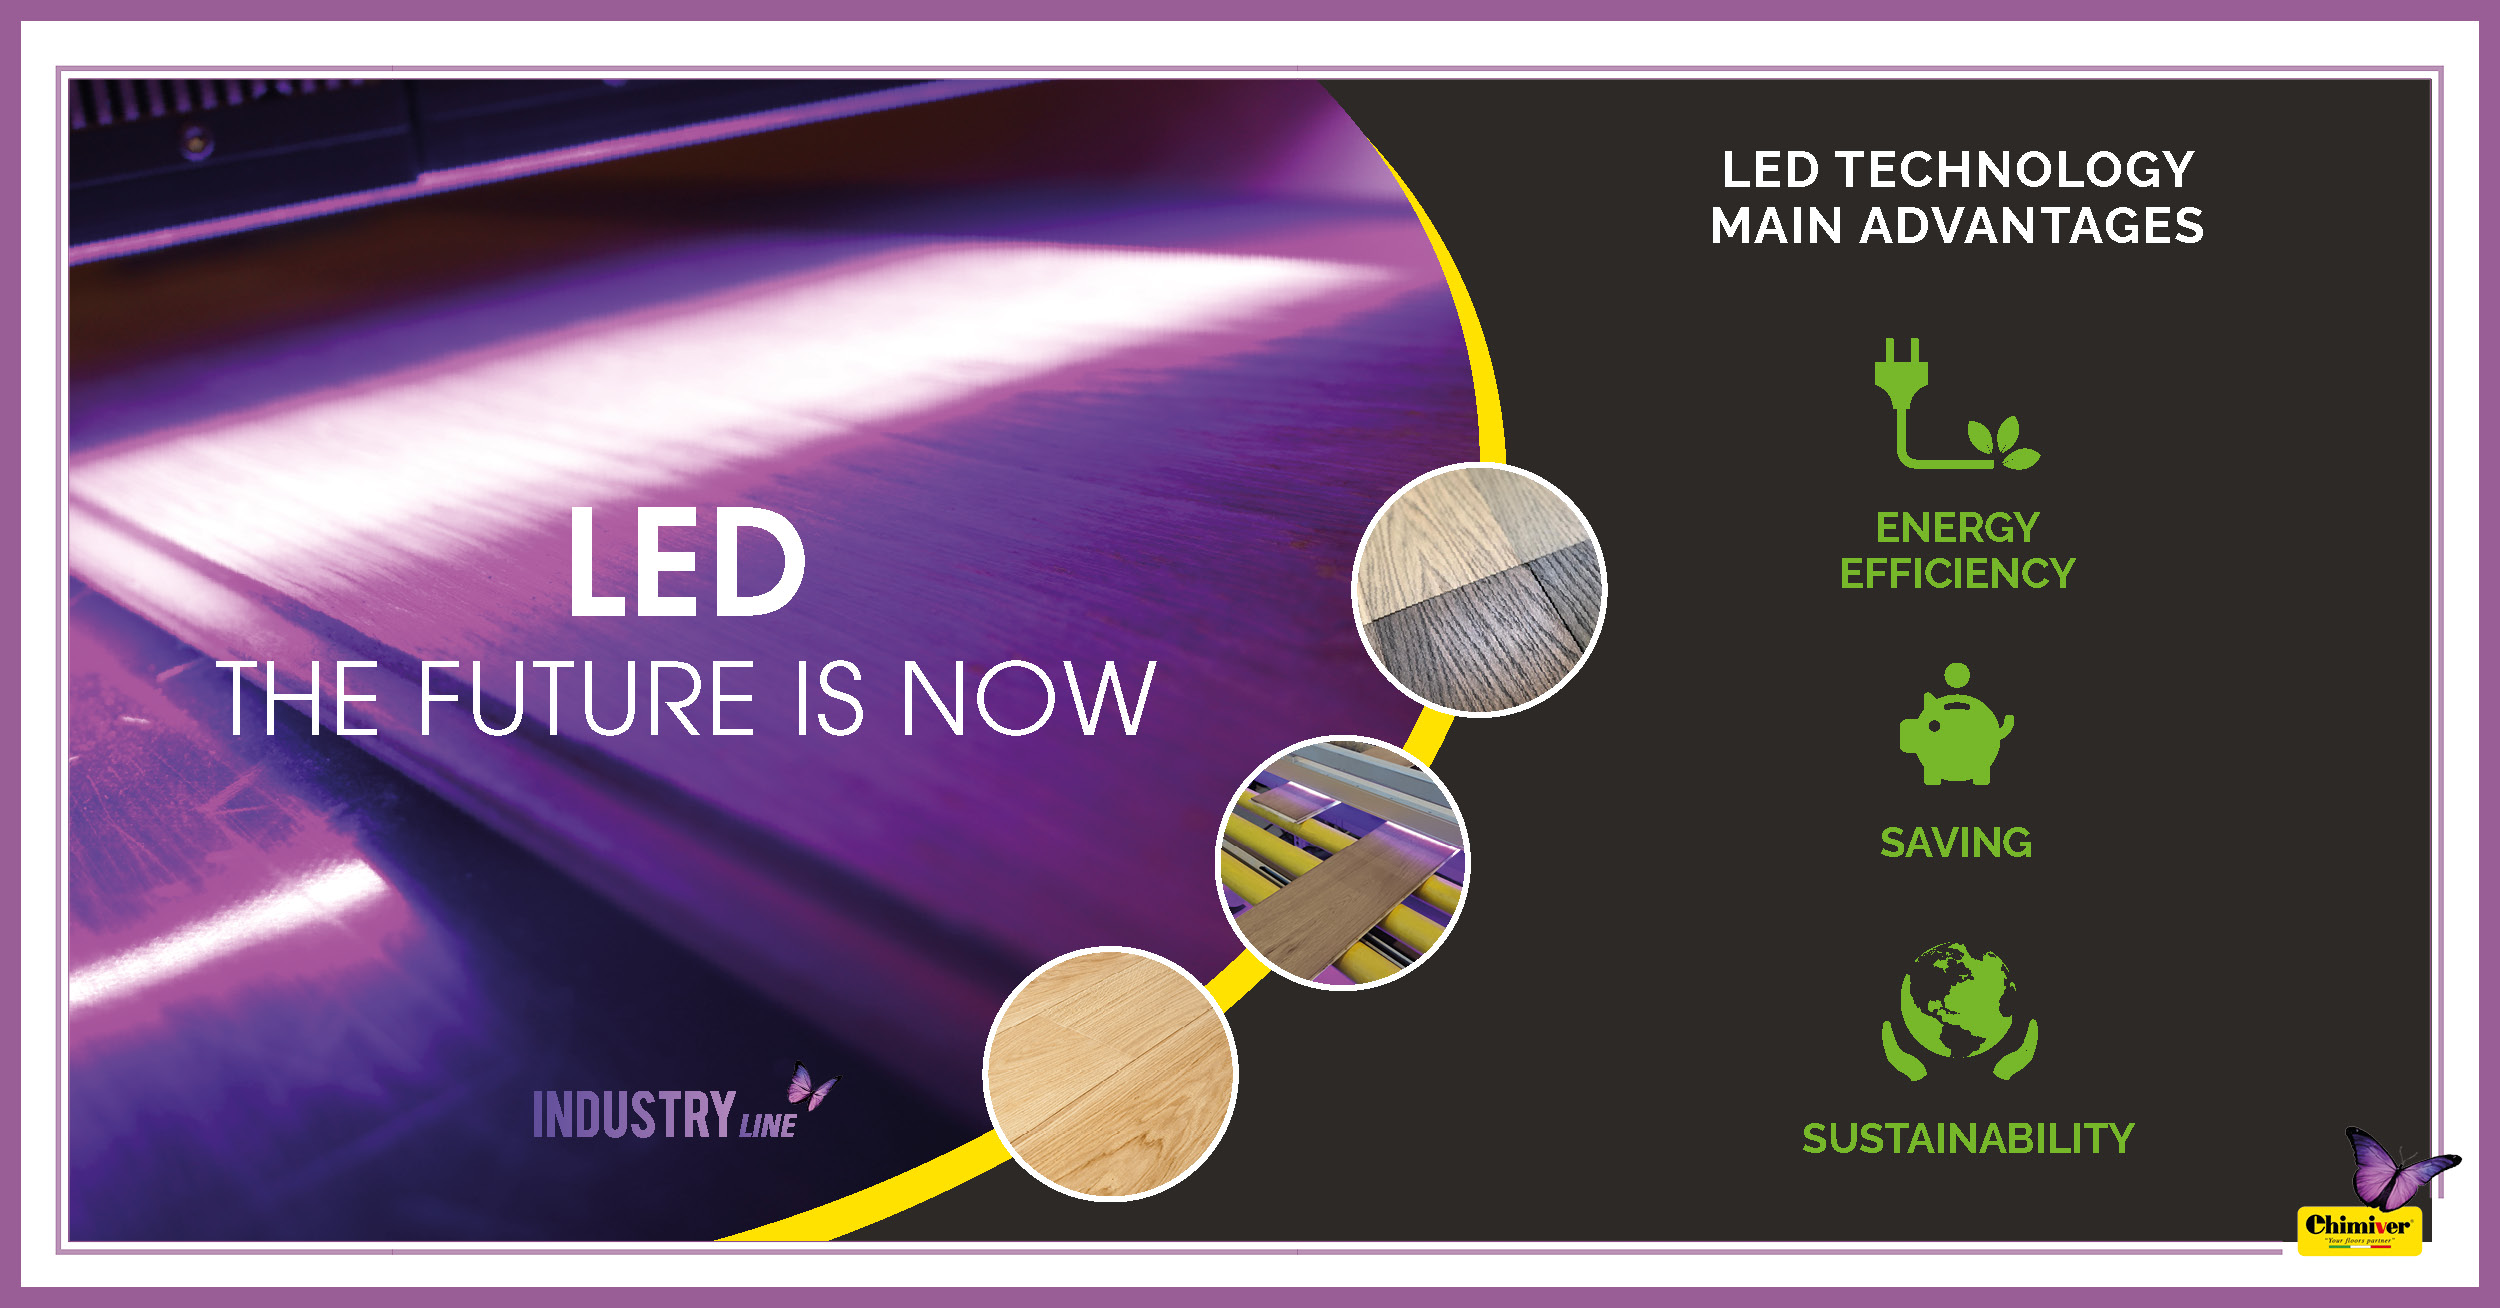 LED, THE FUTURE IS NOW – Chimiver coating products